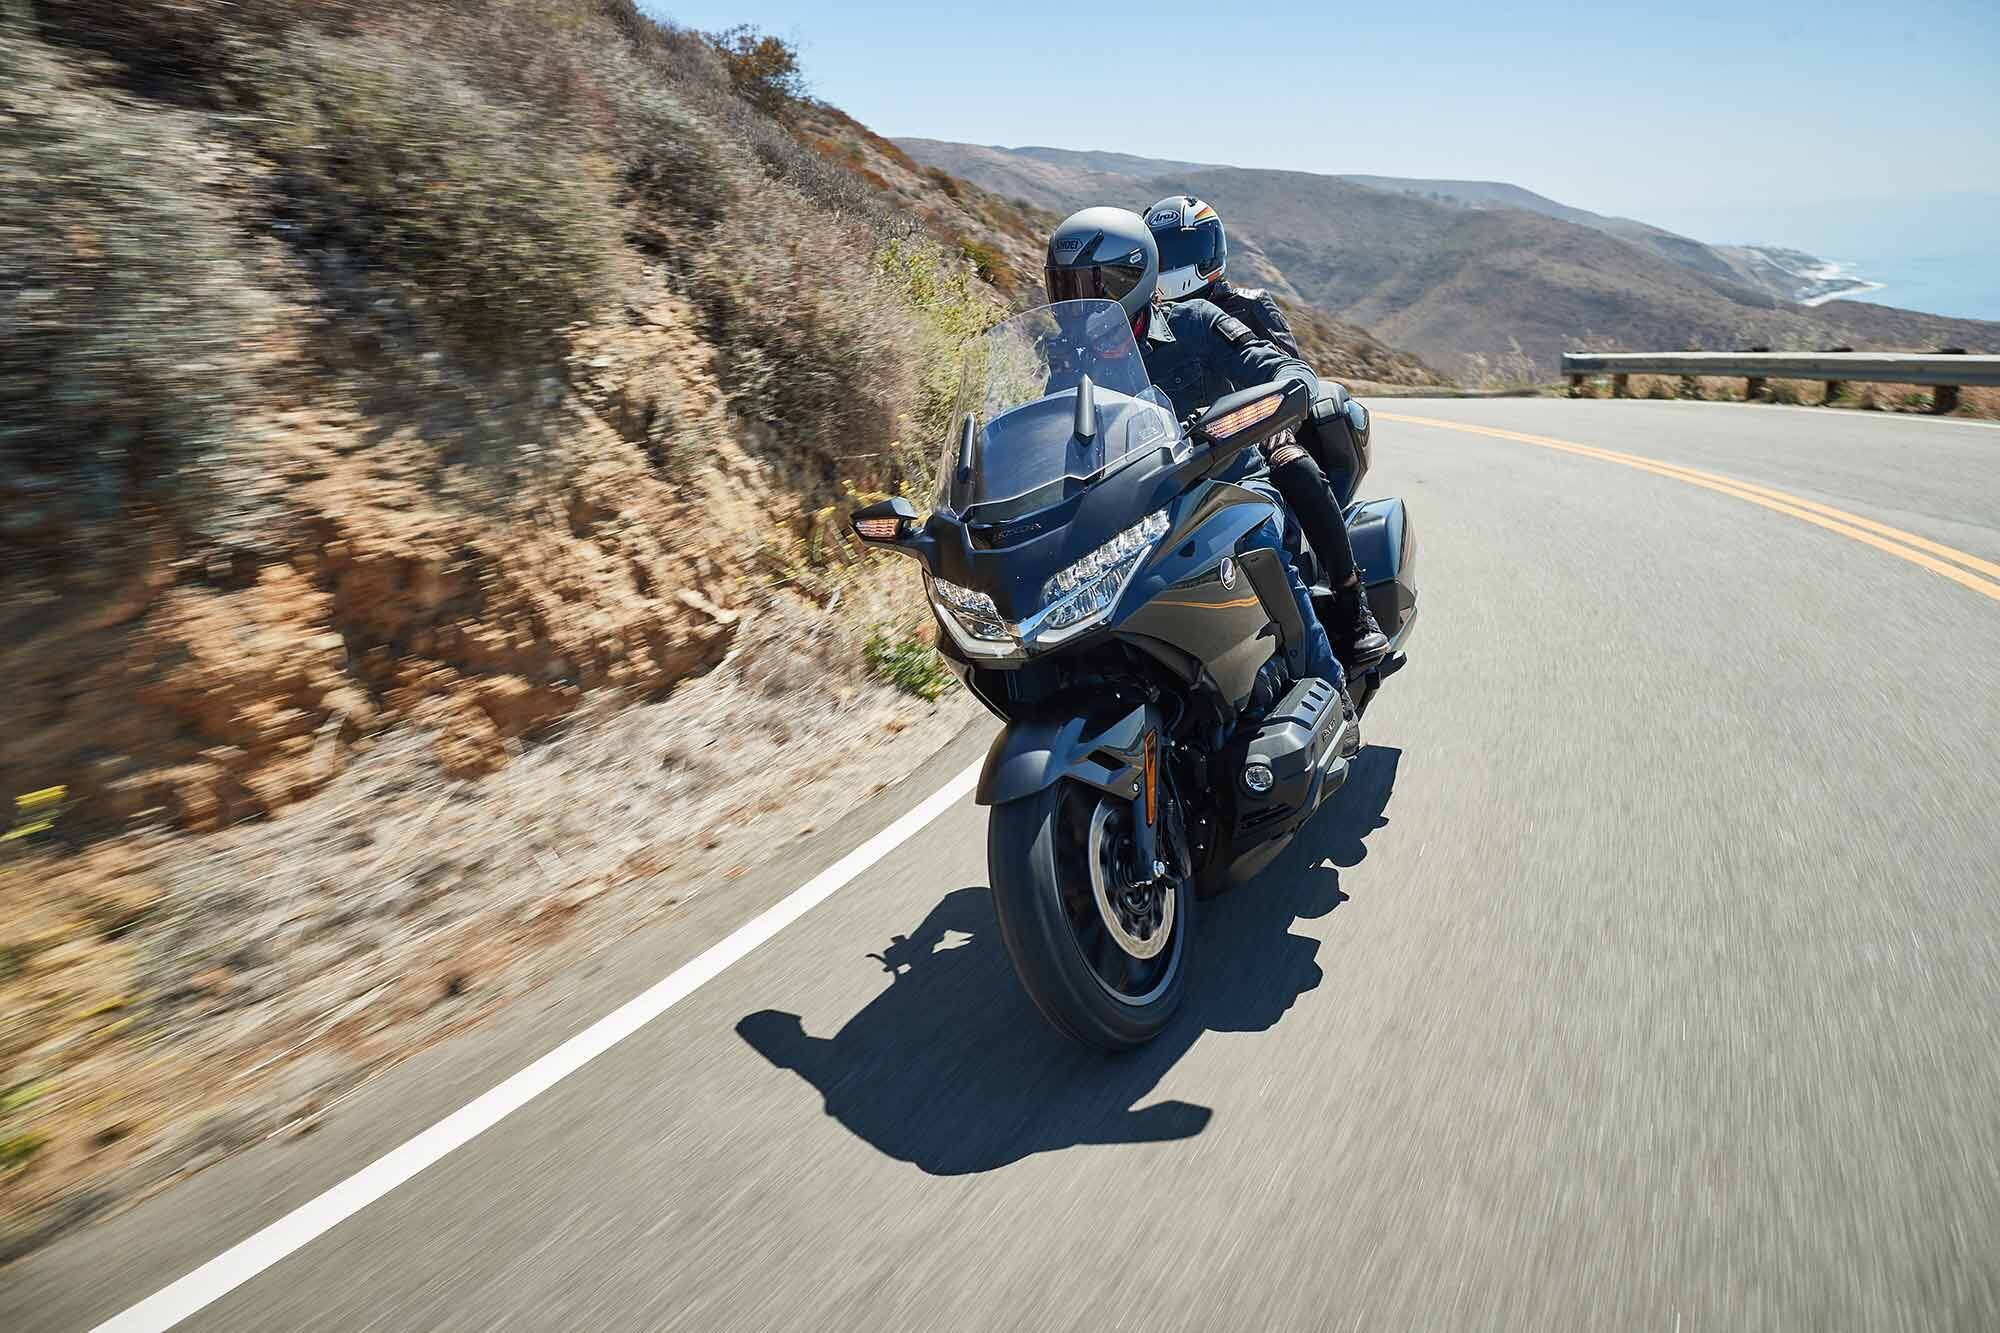 Honda’s 2021 Gold Wing Tour becomes an even more capable travel partner as we learn in this review.